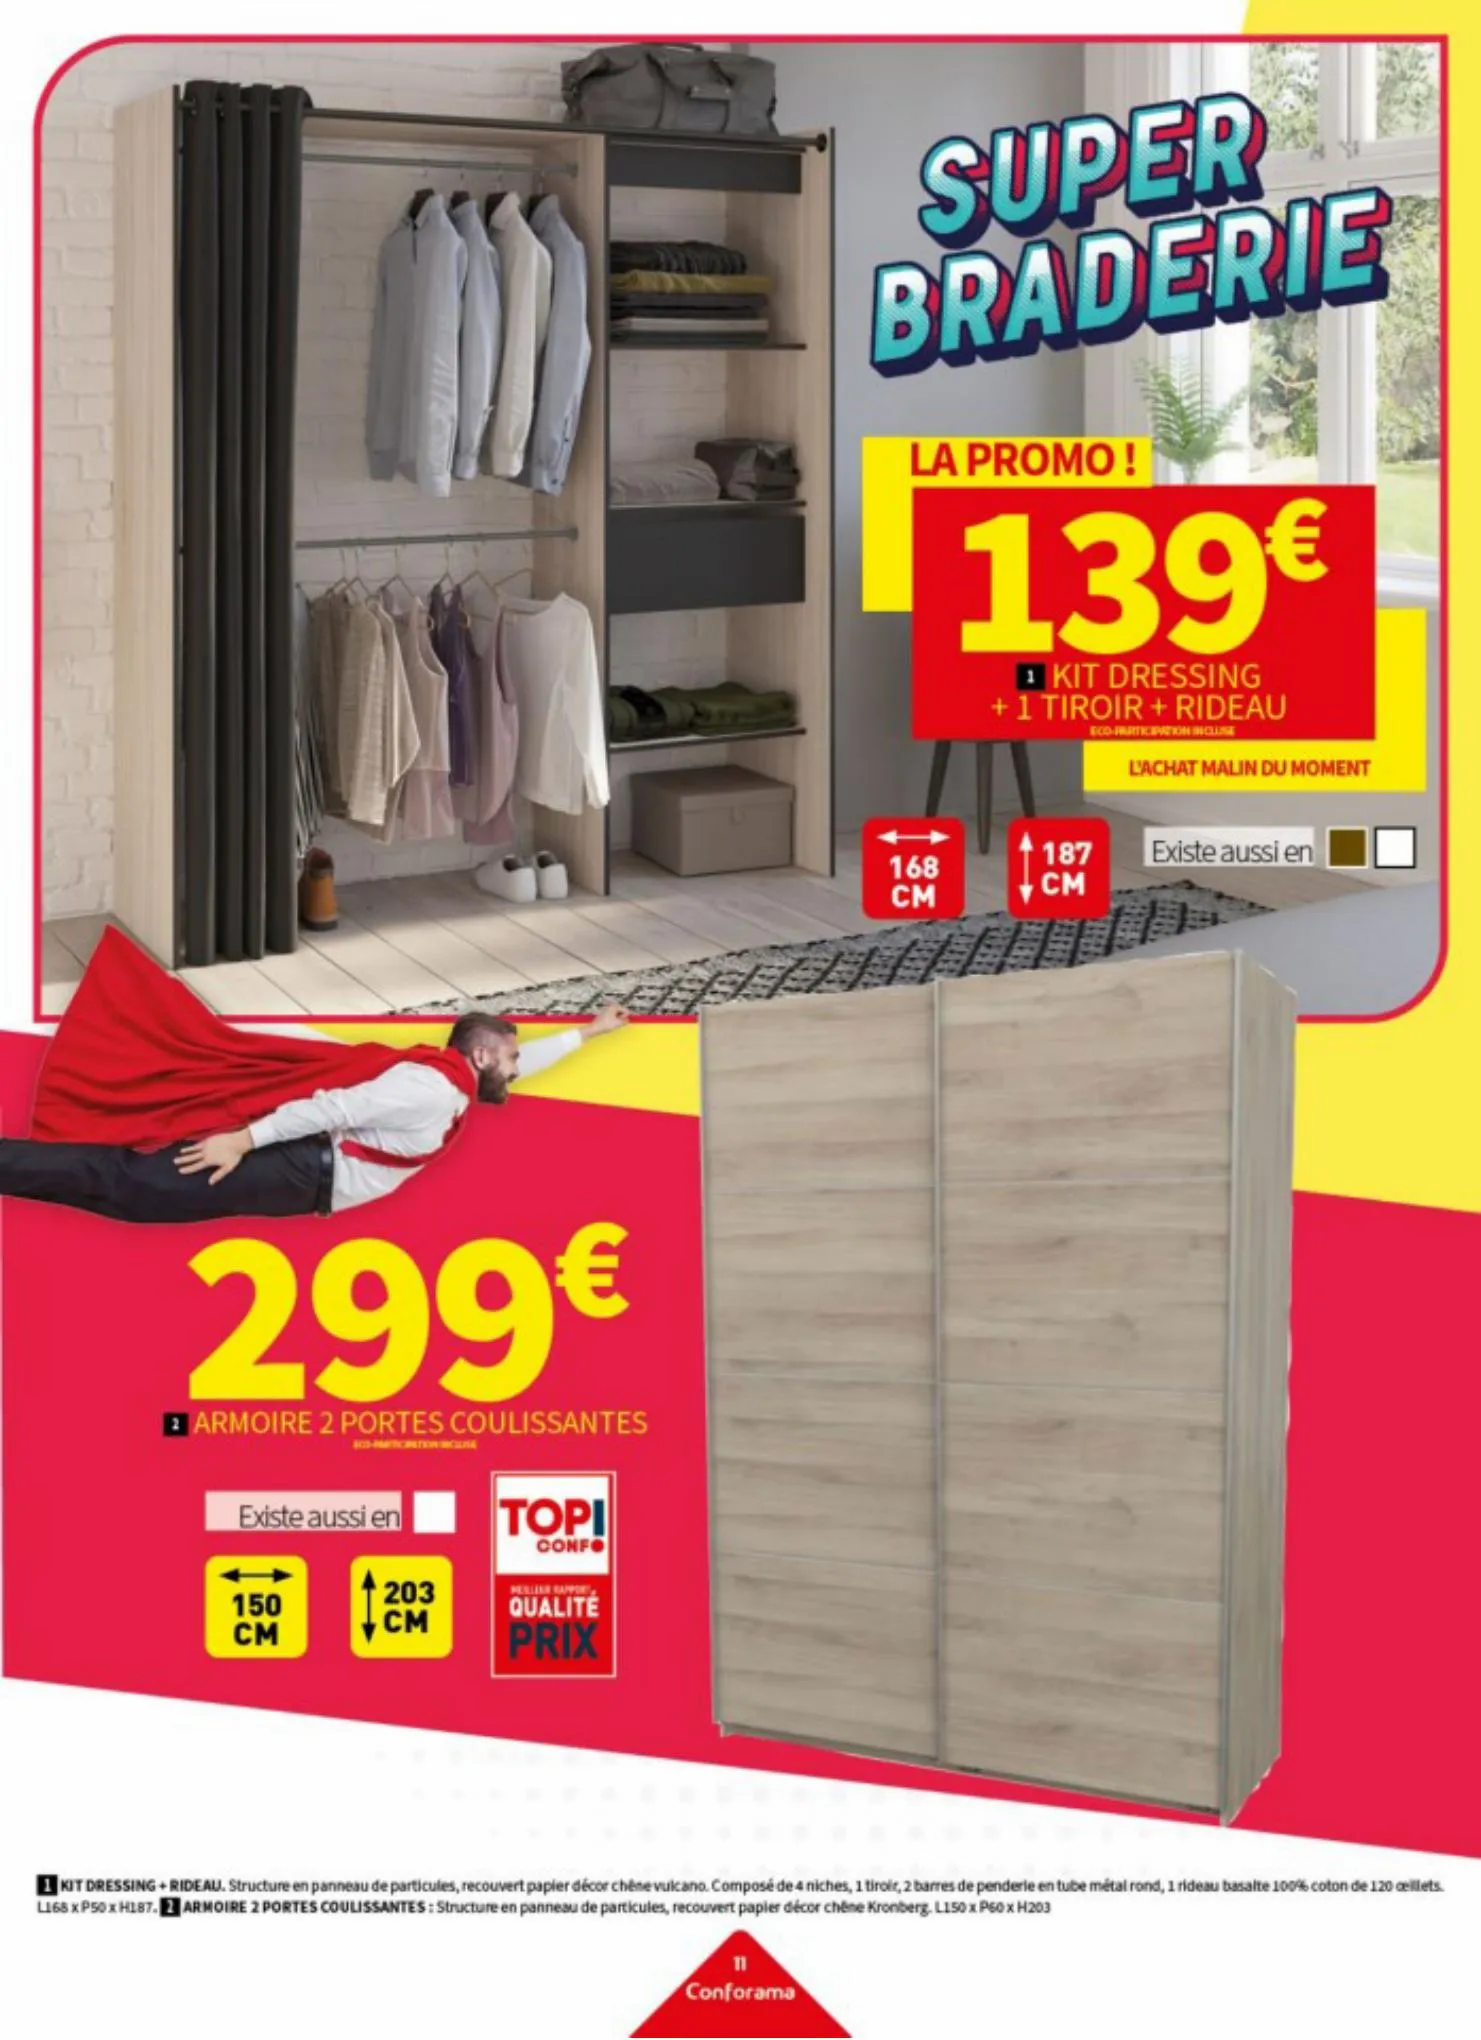 Catalogue Super braderie, page 00011